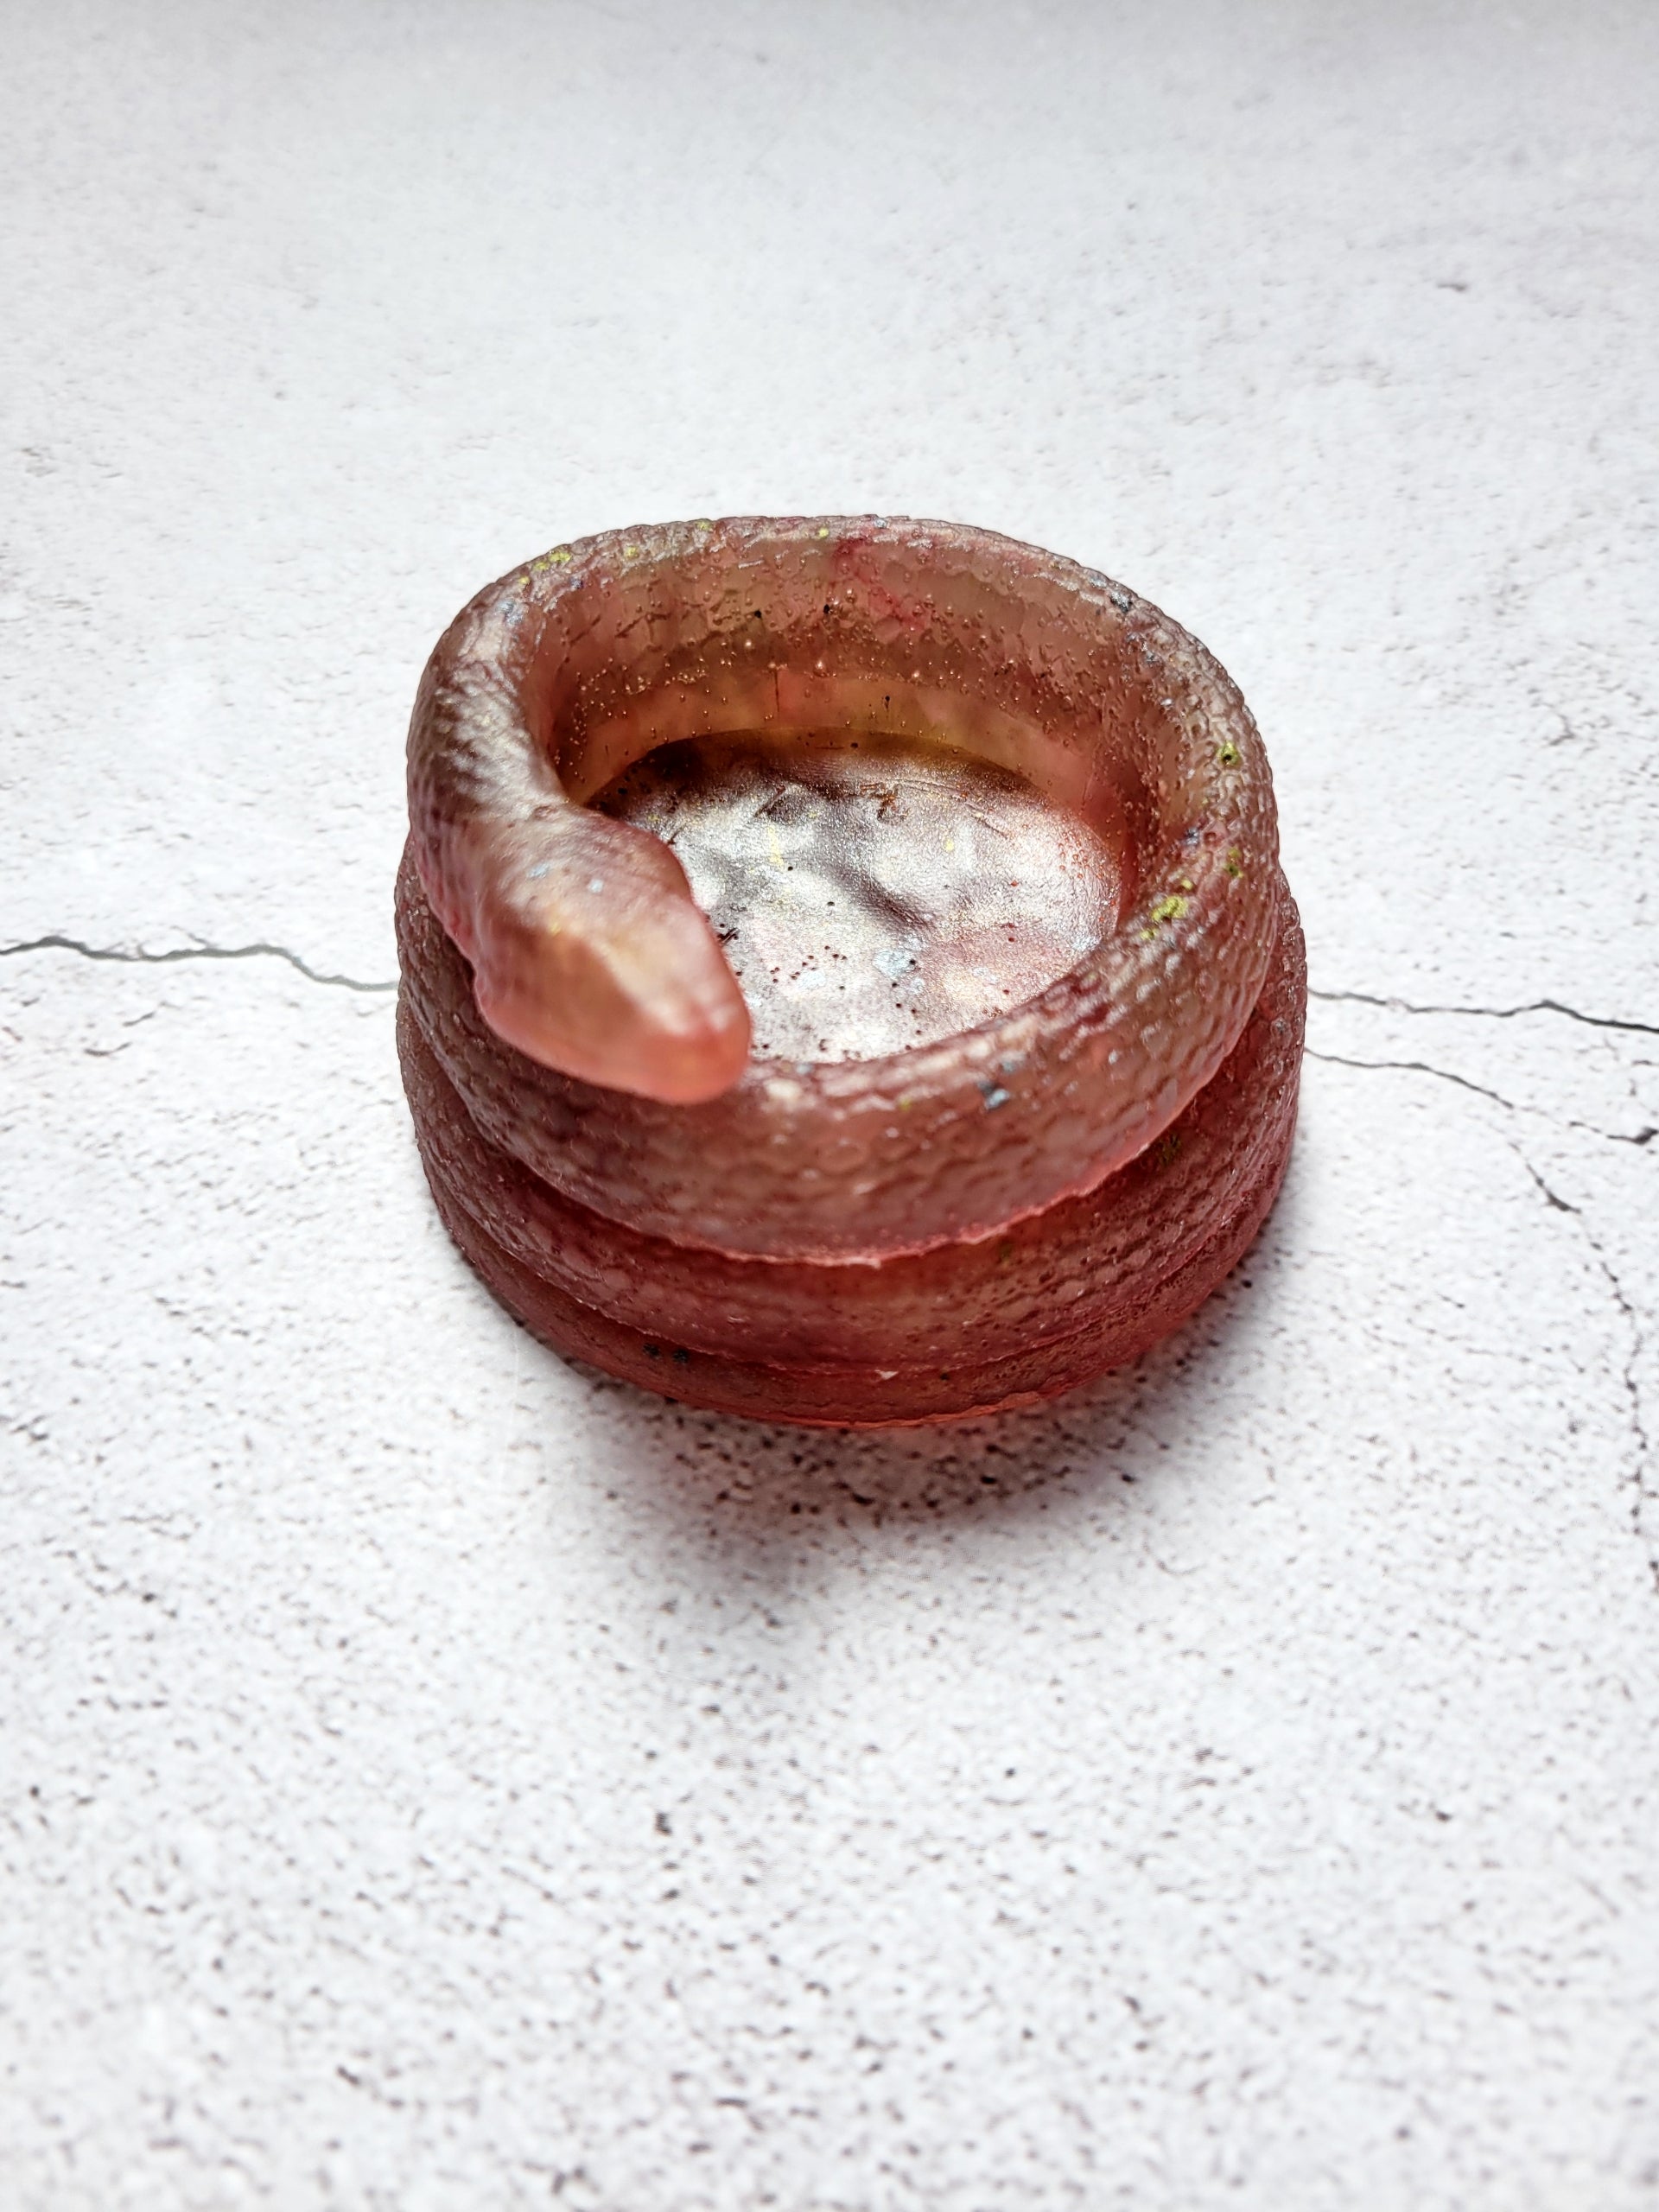 A side view of a tealight candle holder in the style of a coiled snake. It's brownish red in color with flecks of yellows and grays. 